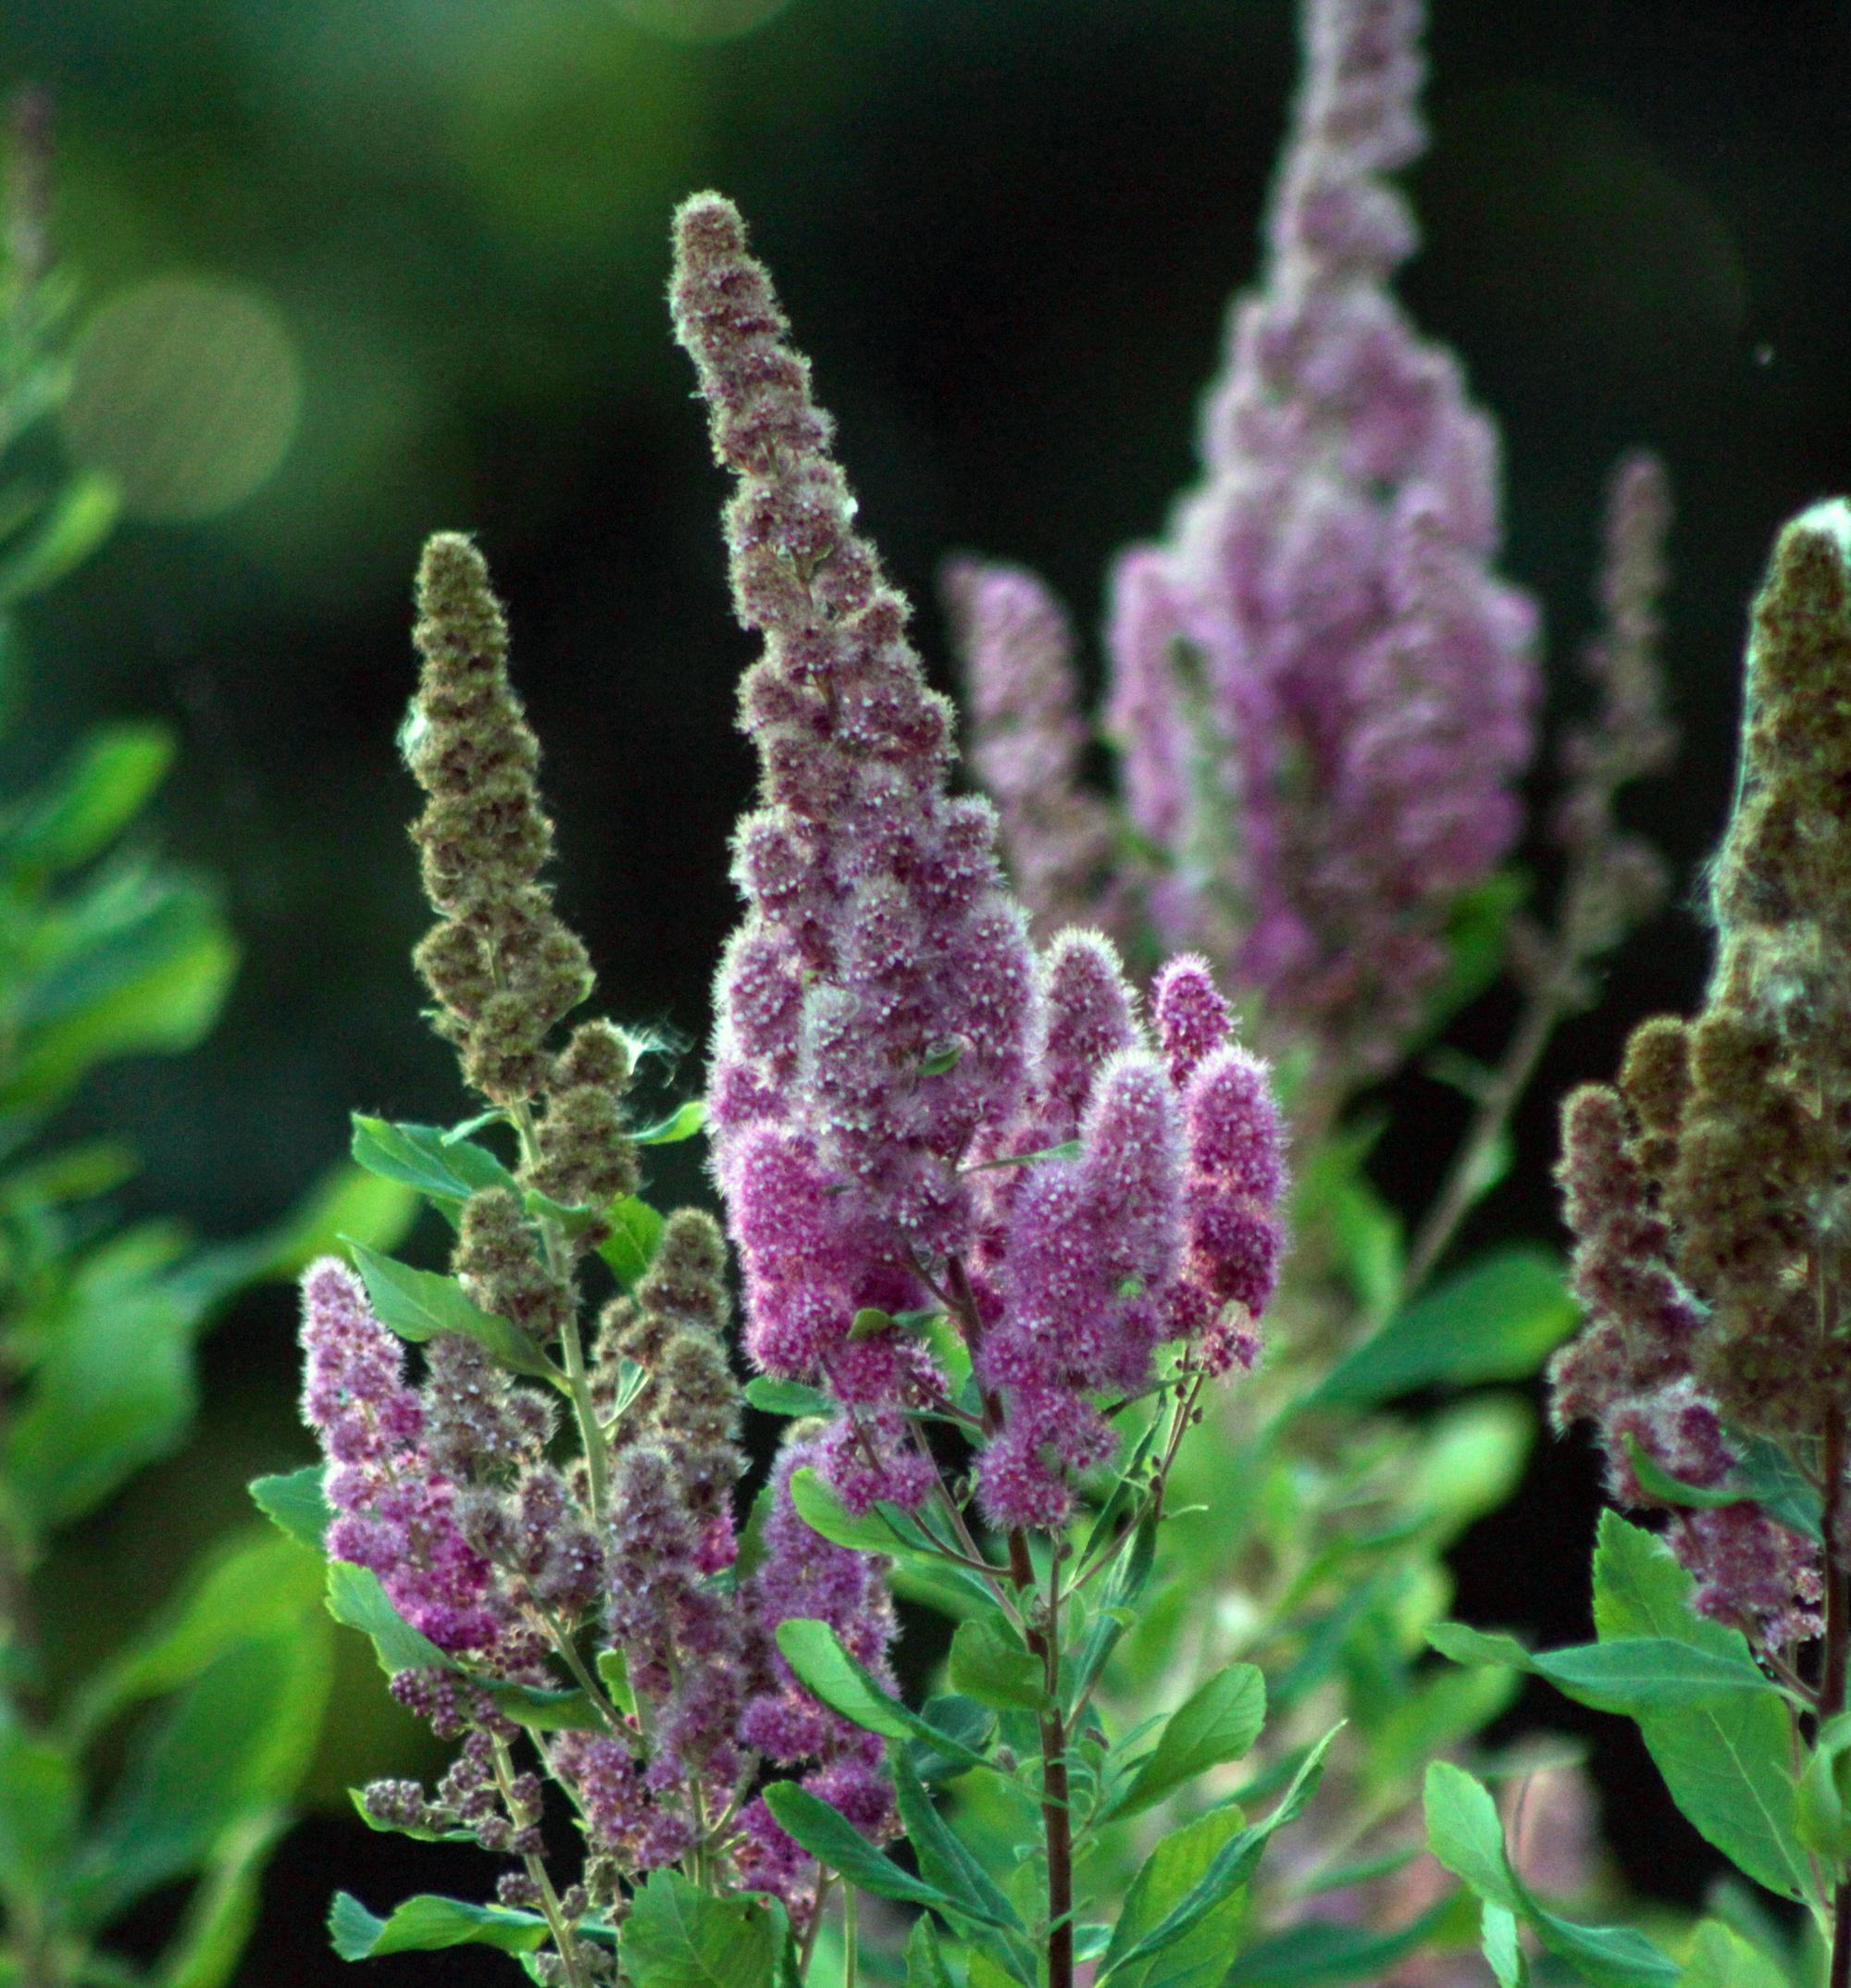 conical plumes of tiny pink flowers on green foliage